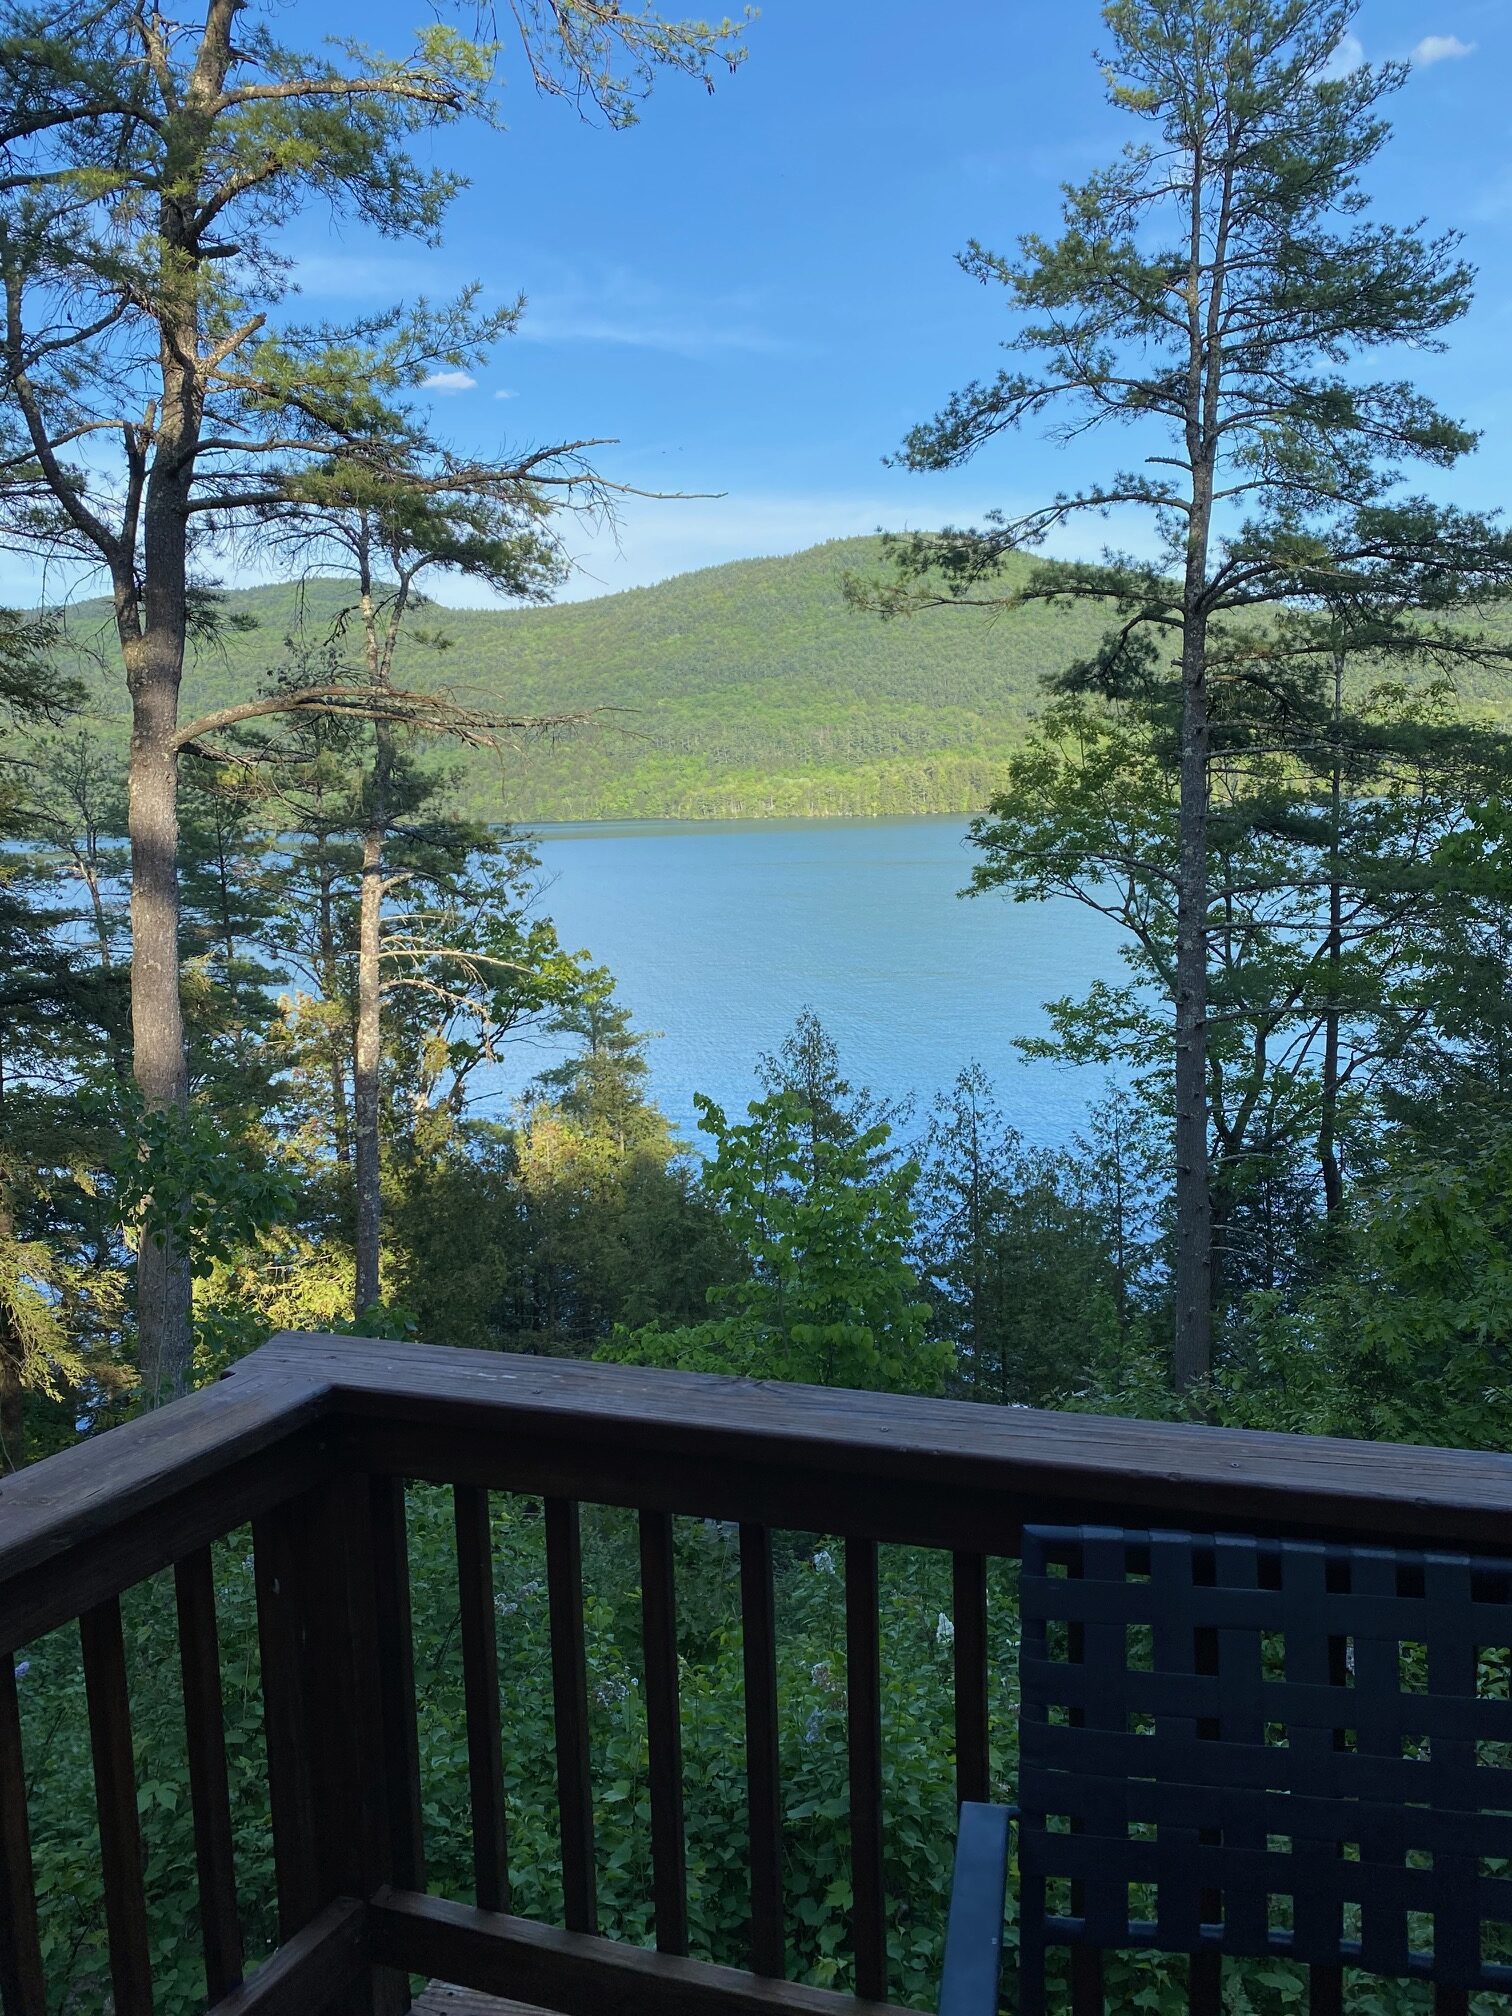 View from the balcony at the Lakehouse